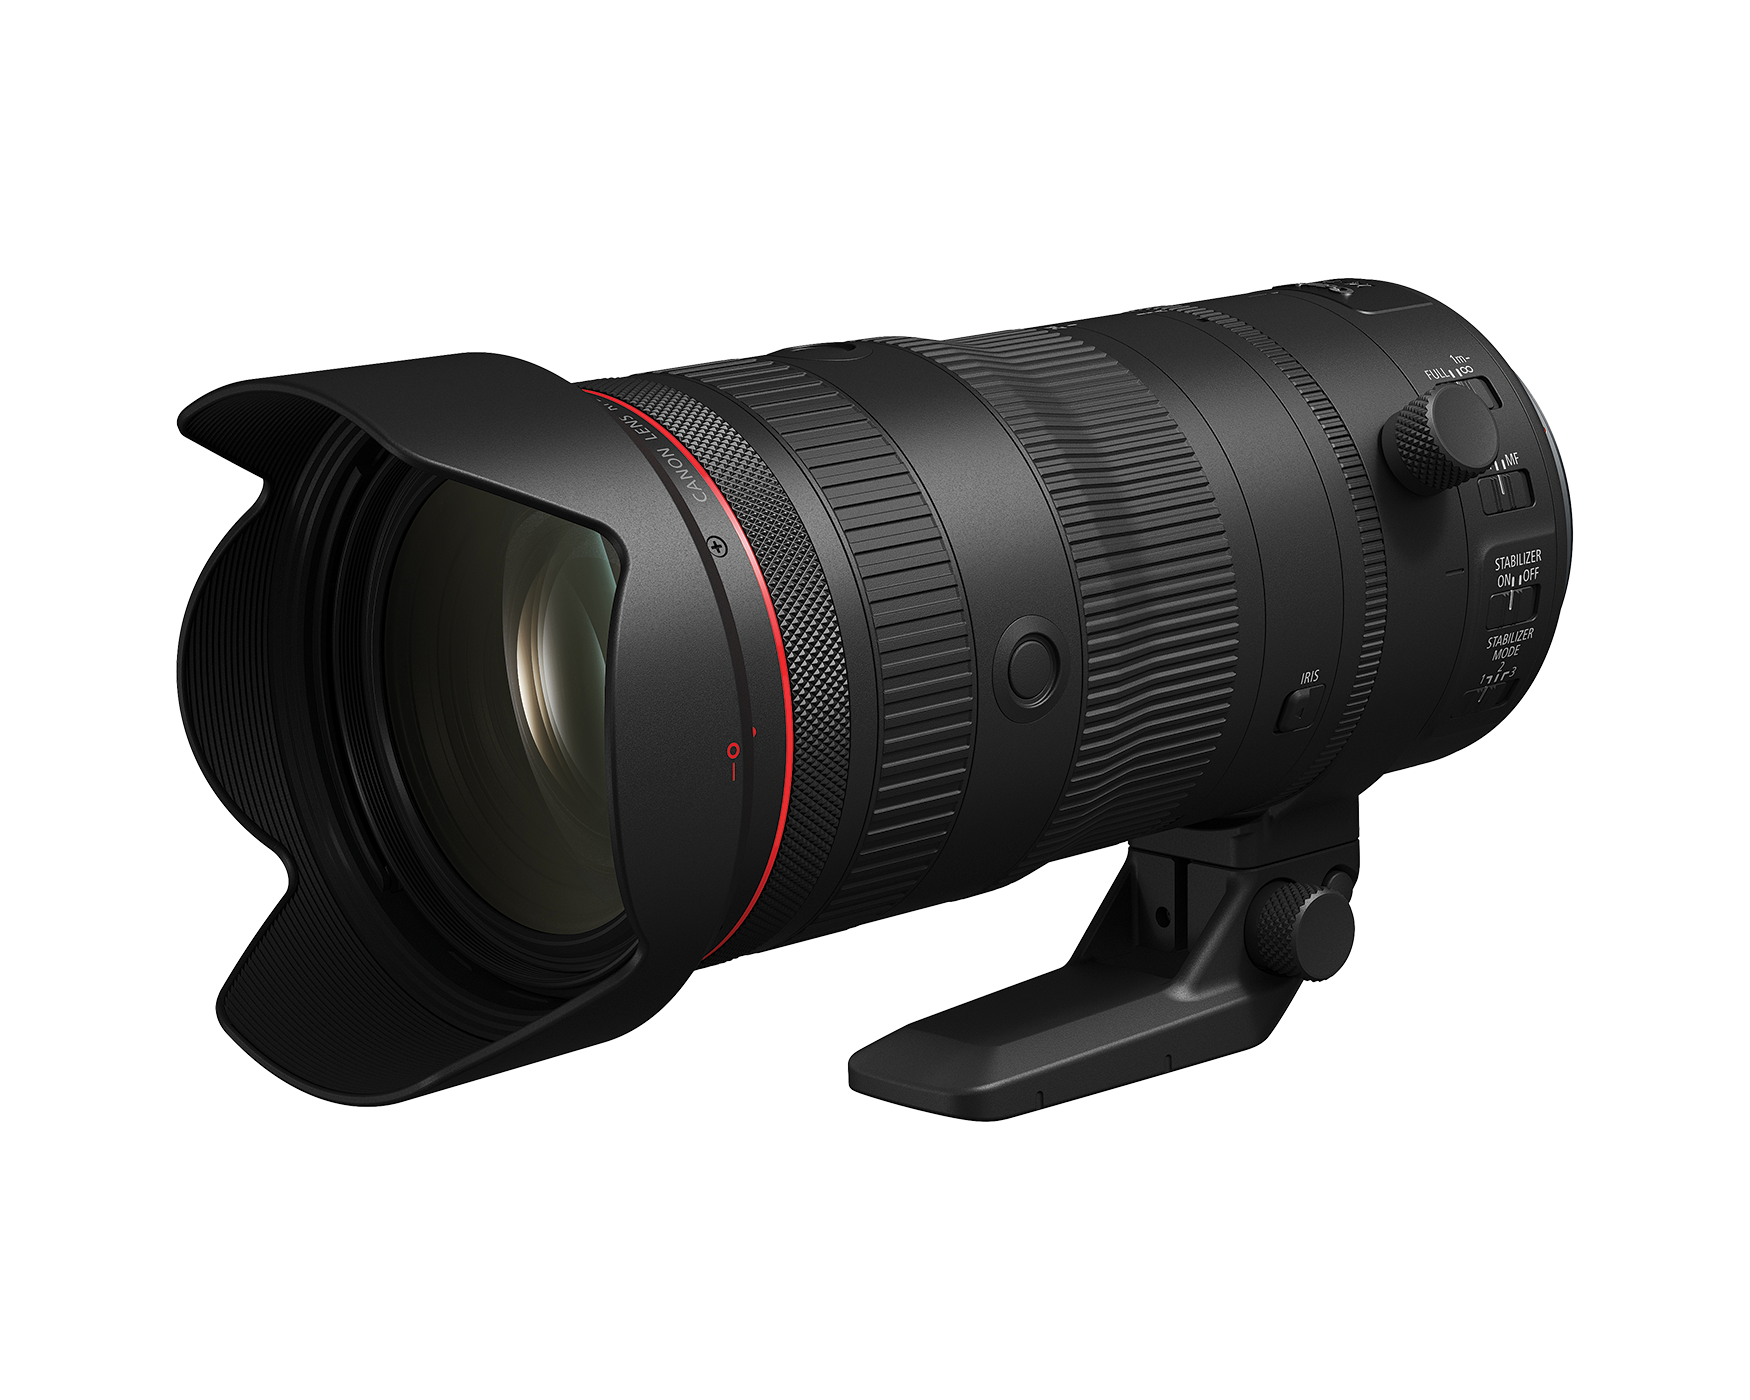 pr rf24 105mm 3 - Canon Introduces Three New Lenses, Enhancing Still Photography and Video Production for Any Skill Level